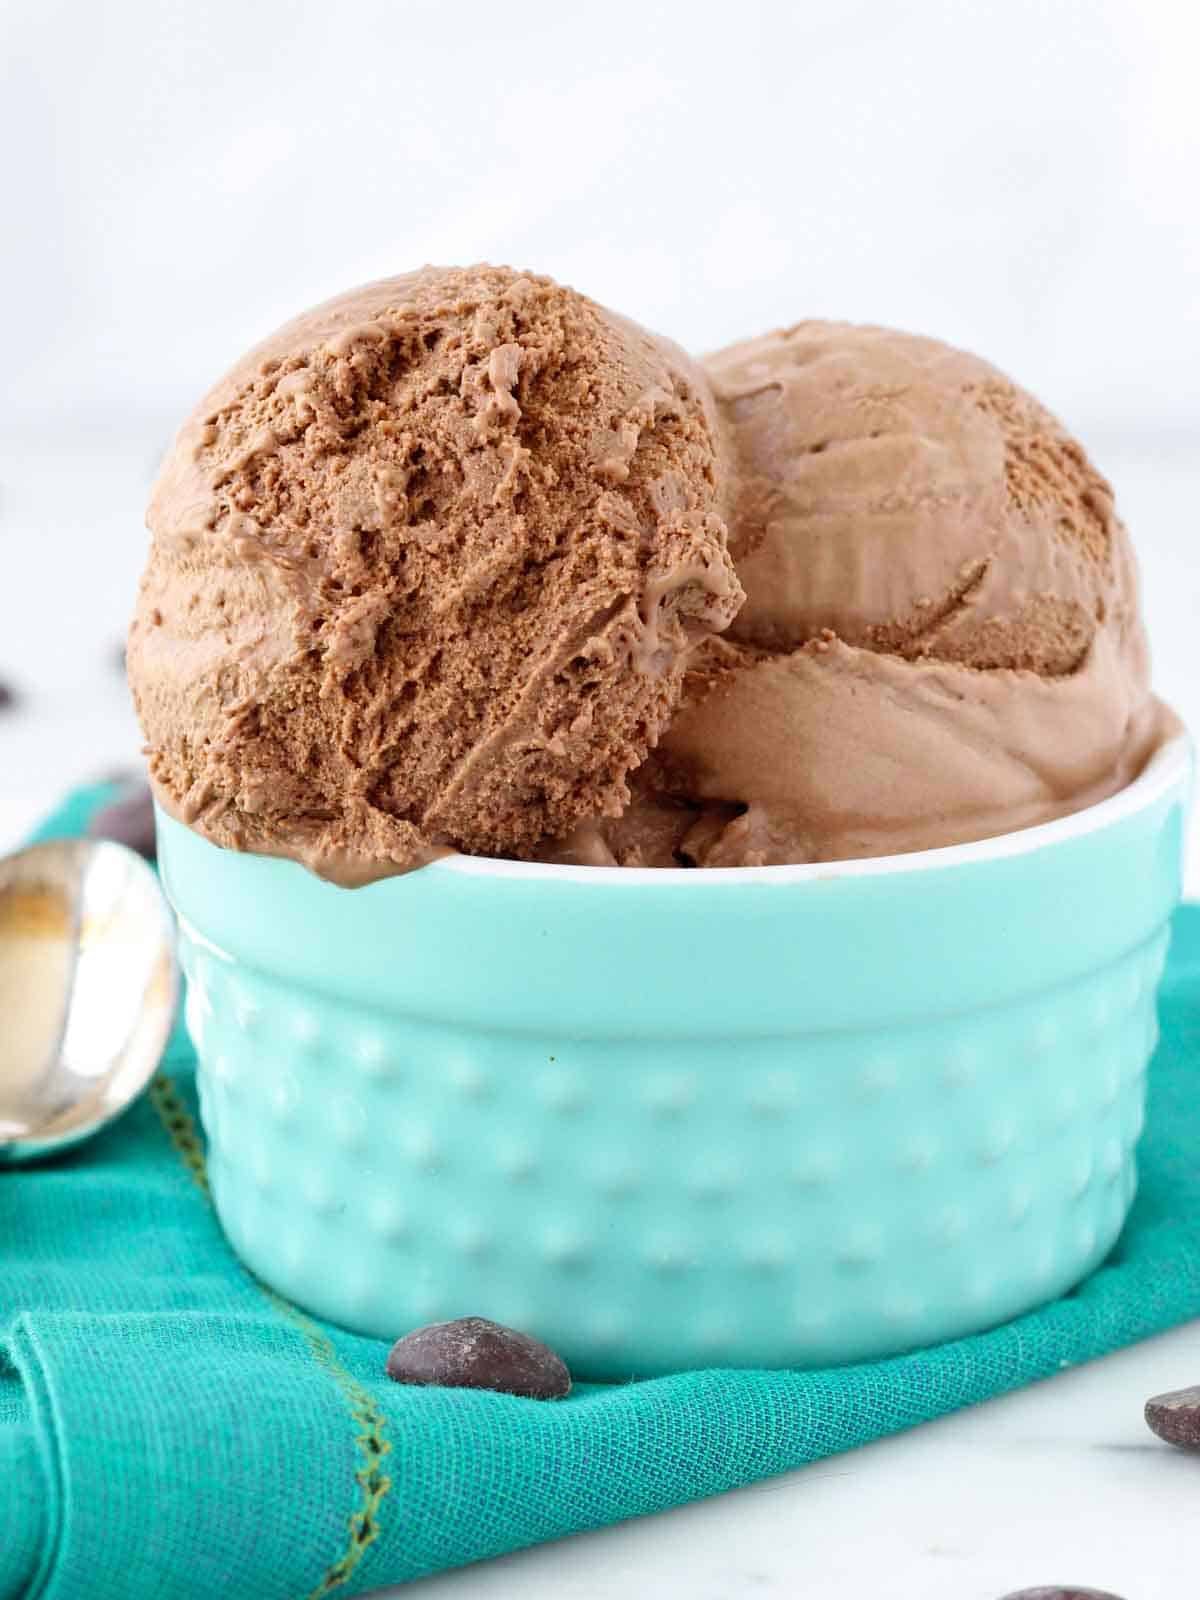 3 scoops of chocolate ice cream in teal bowl.